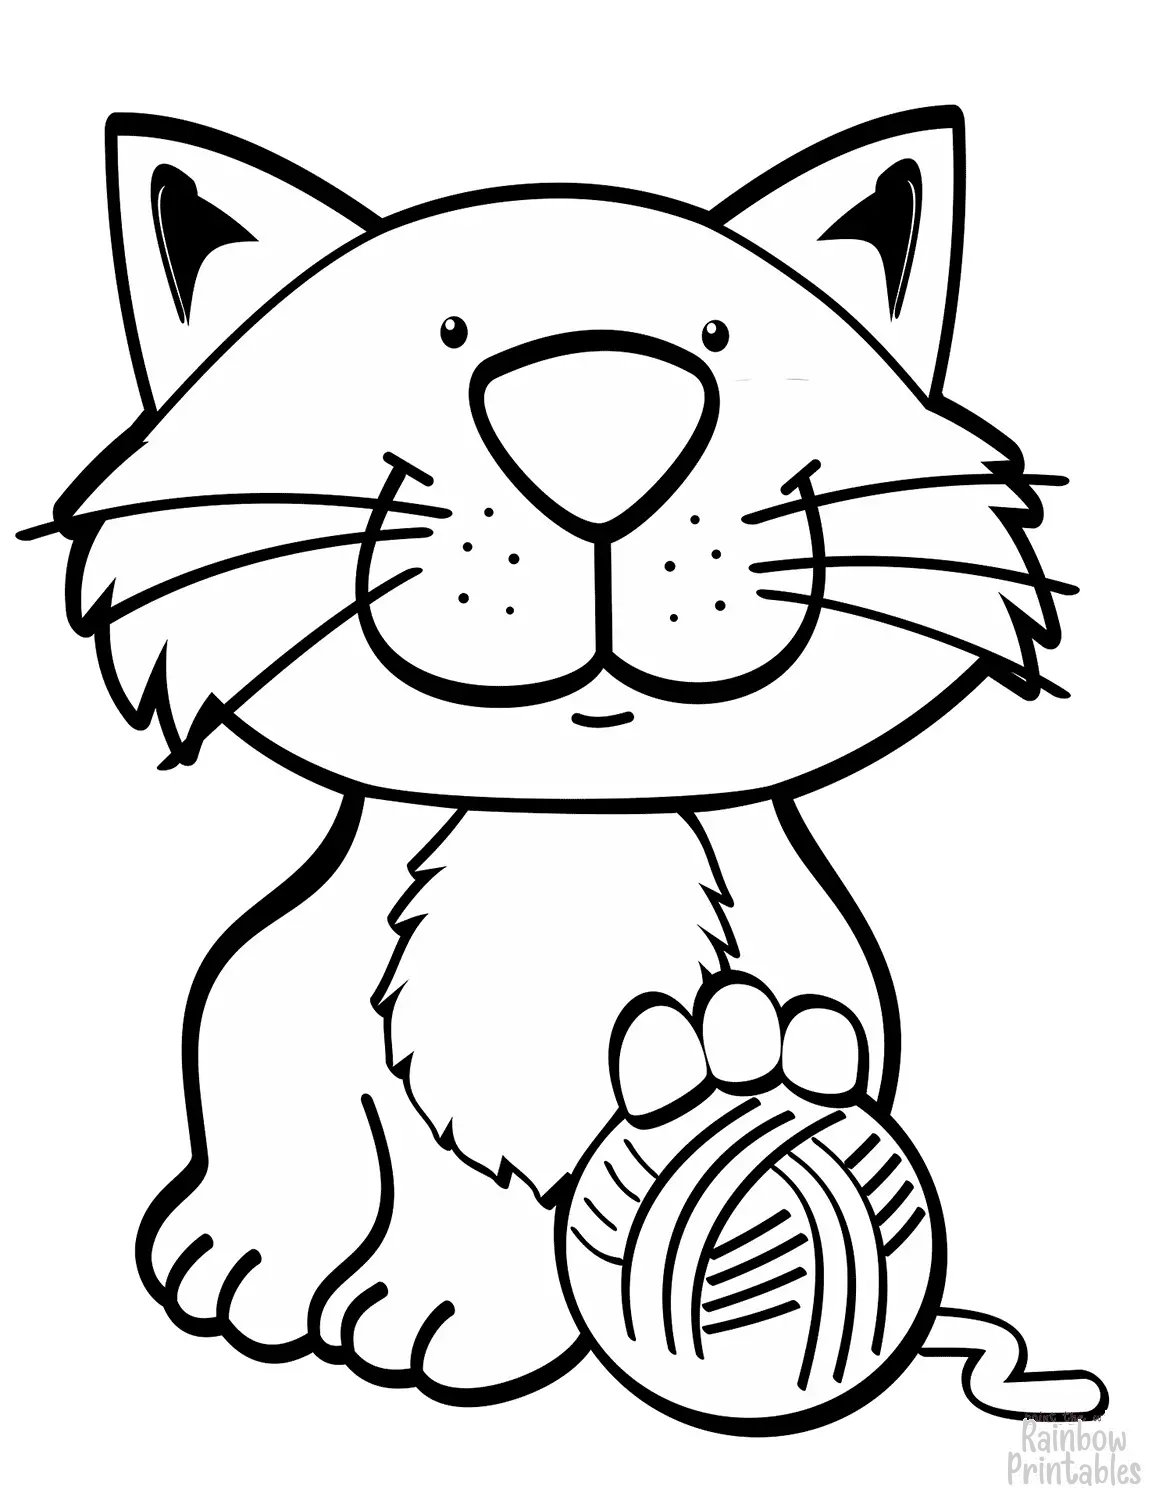 Cute-drawing-cat-with-yarn-ball-coloring-page